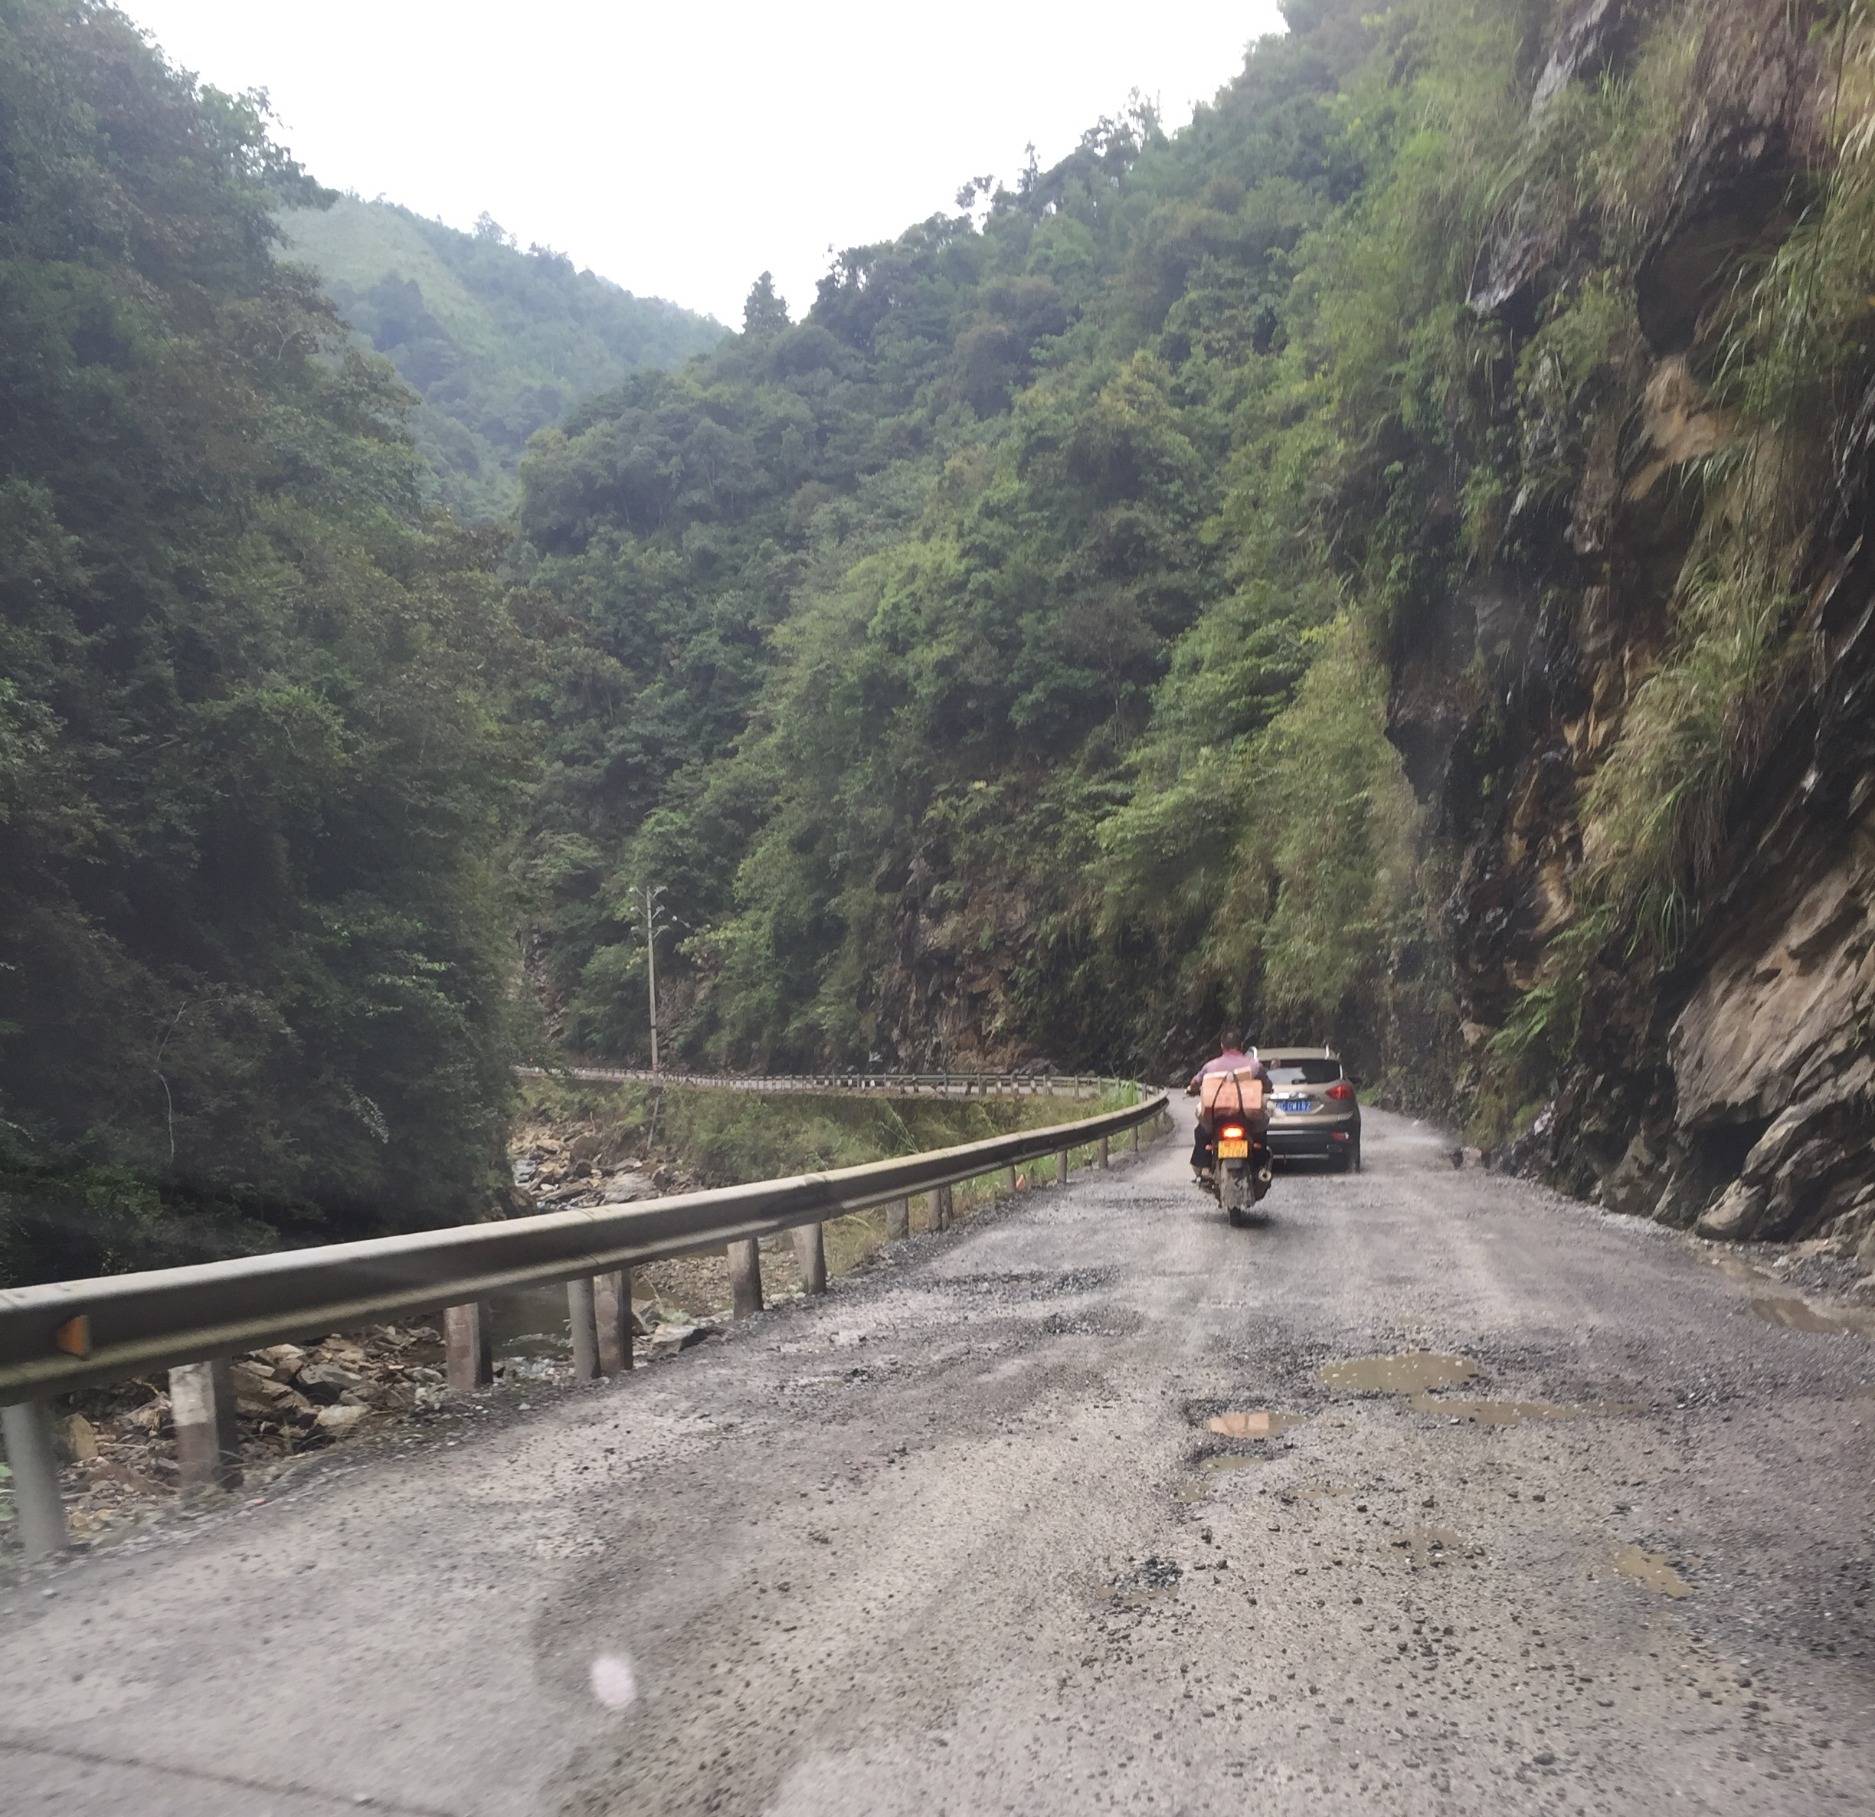 Guilin. Part 6. Mountain road to rice terraces.